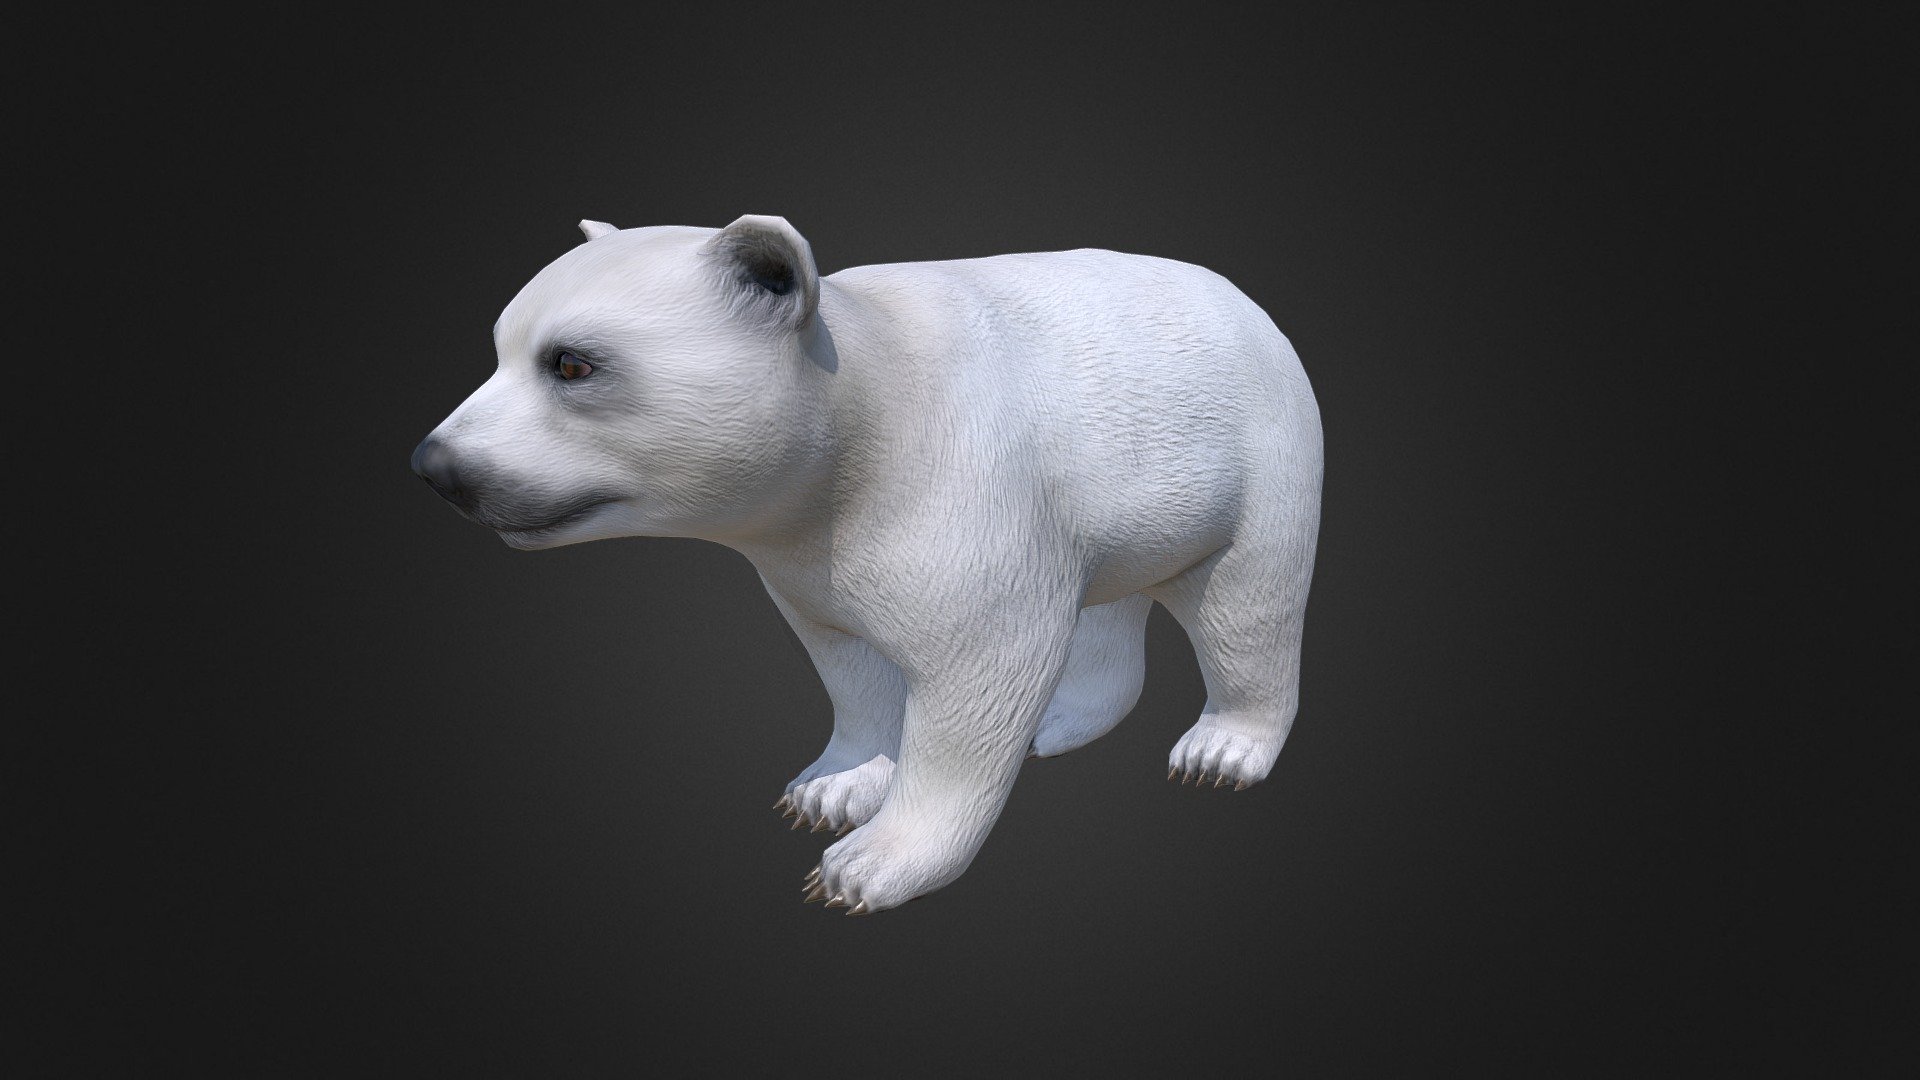 This asset has Polar Bear Cub model.

Model has 4 LOD.
- 8600 tris
- 6600 tris
- 4500 tris
- 2900 tris

Diffuse, normal and metallic / Smoothness maps (2048x2048).

80 animations (IP/RM)

Attack 1-3, death,eat 1-2, hit (back,front,midle), idle 1-3, jump IP, jump forward, jump (start, idle up, idle horisontal, idle down, end), lie (start,idle,end), sleep(start,idle,end), trot (forward,left,right), run (forward,left,right),walk (f-b-l-r-bl-br), swim(f-b-l-r-bl-br), turn (left,right) etc.

If you have any questions, please contact us by mail: Chester9292@mail.ru - Polar Bear Cub - Buy Royalty Free 3D model by Rifat3D 3d model